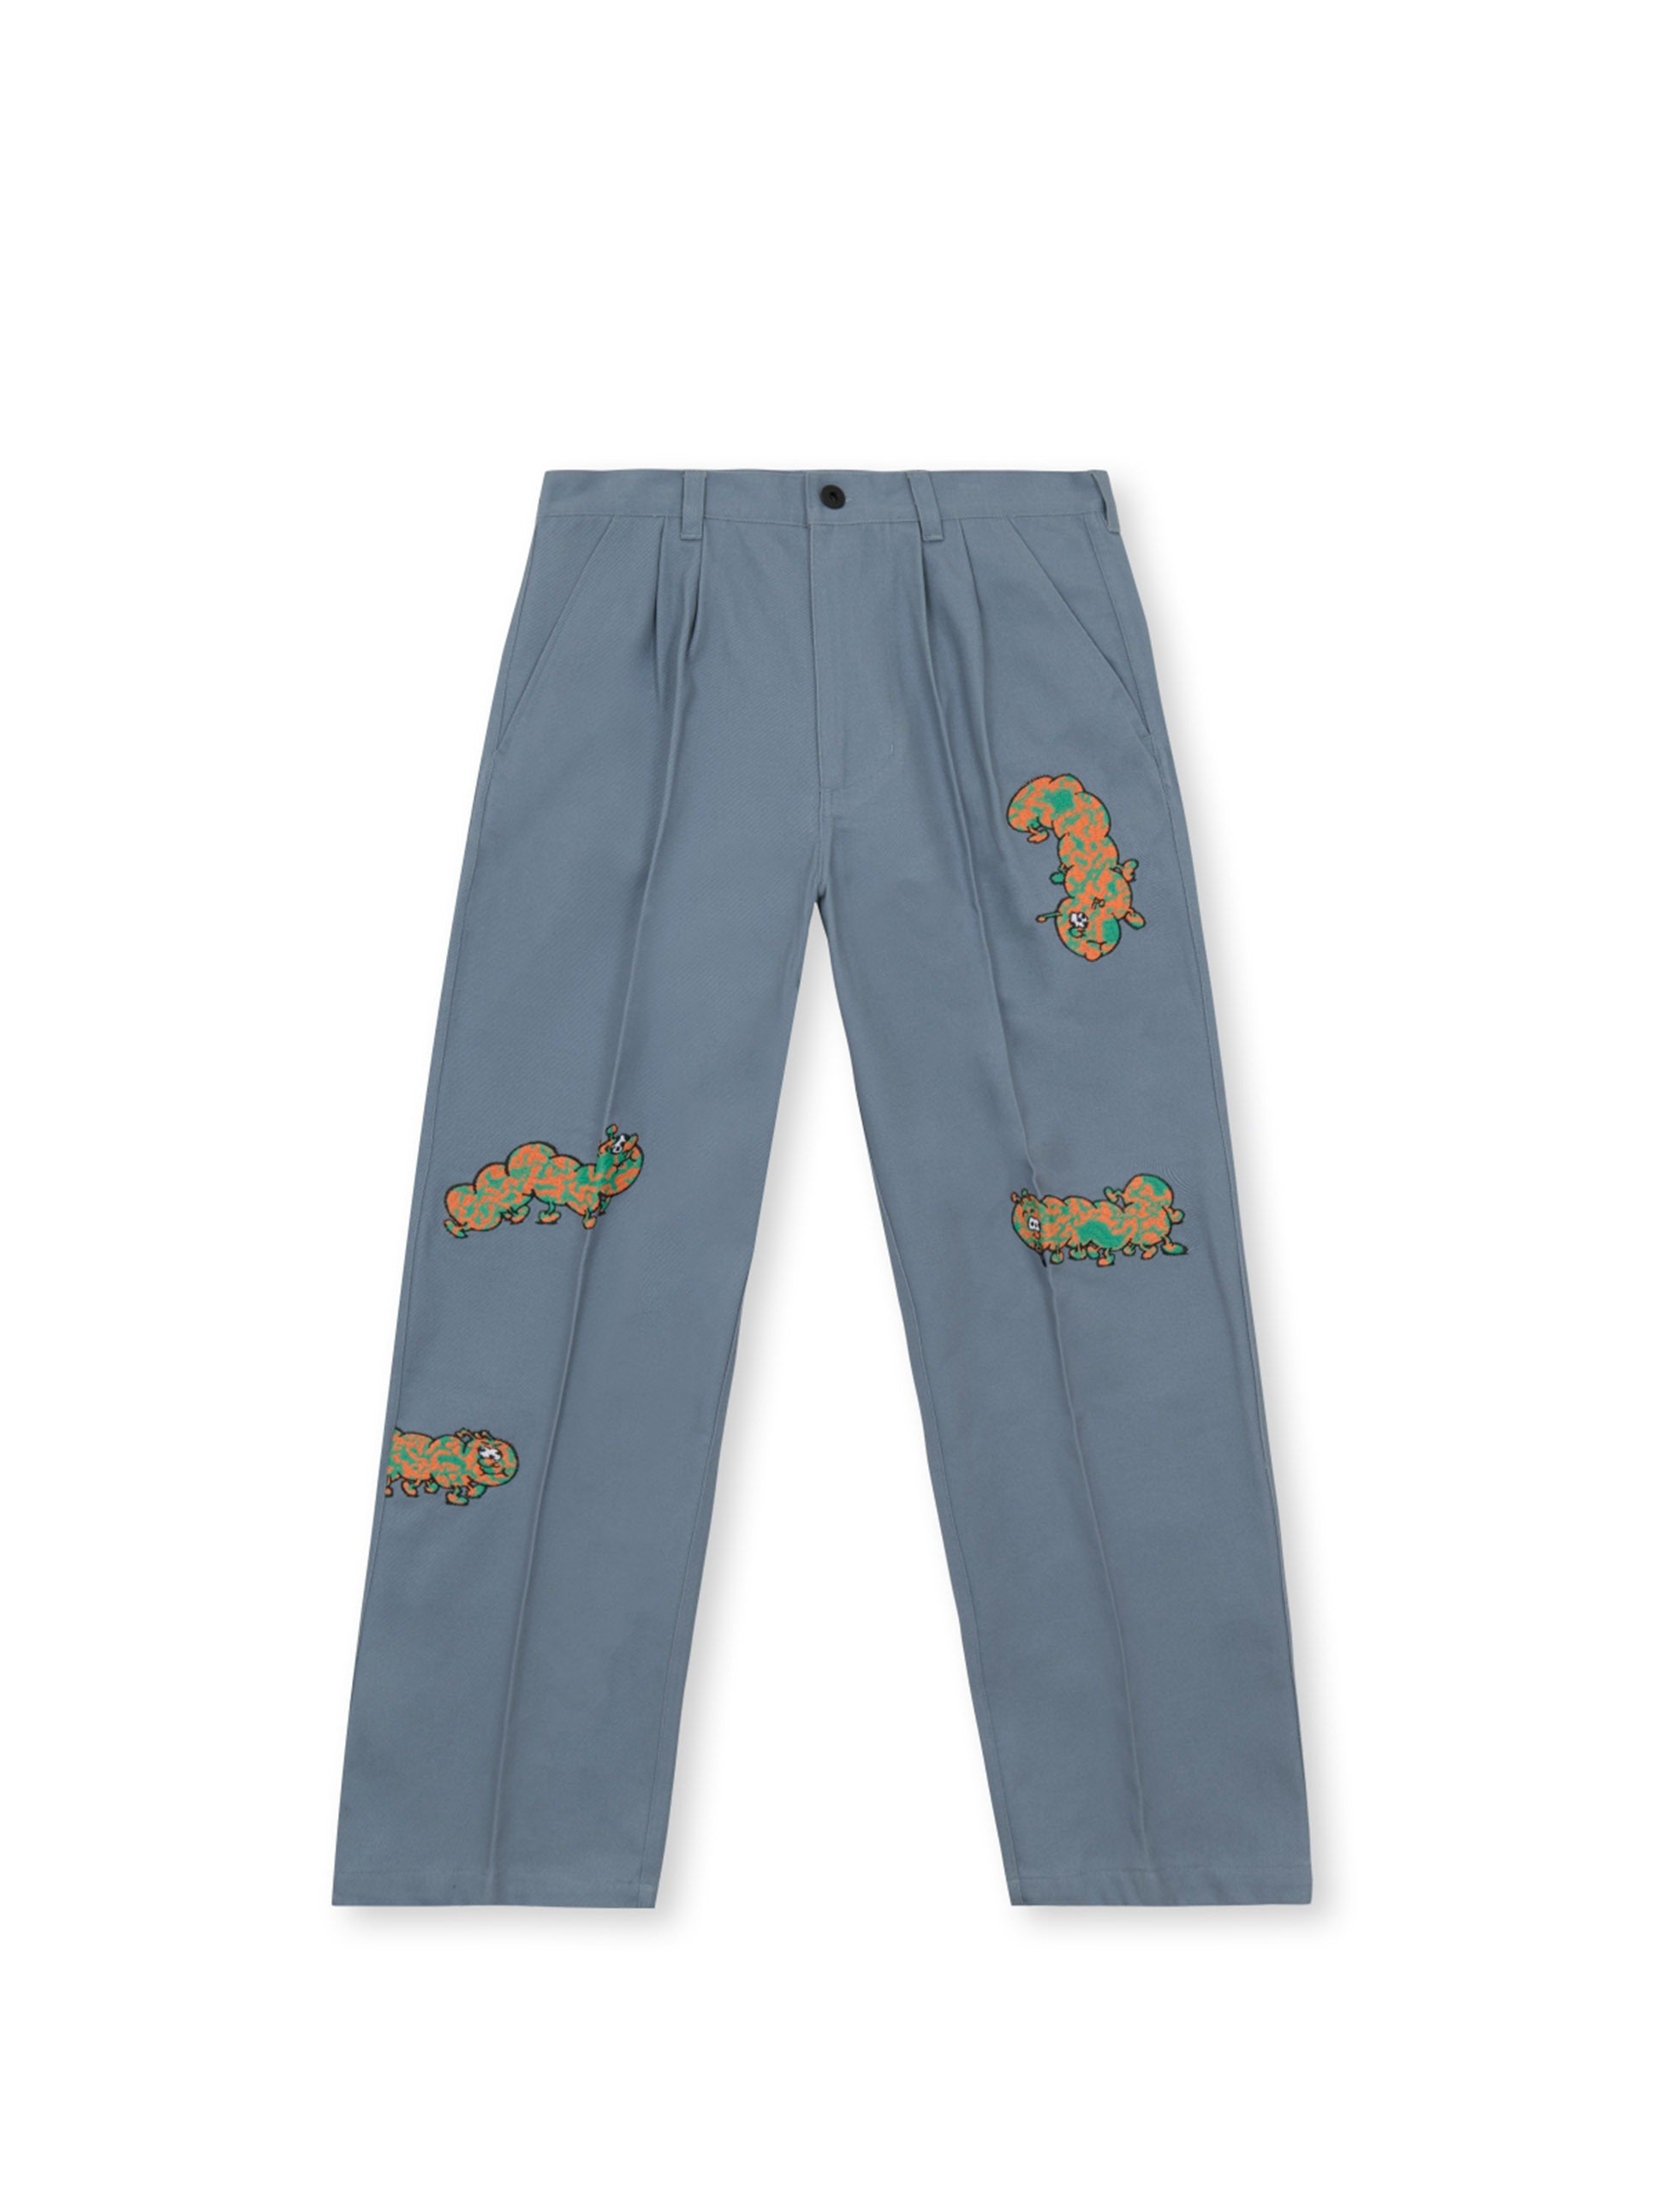 SS21 Drop 3 worms pleated pants blue front optimized copia